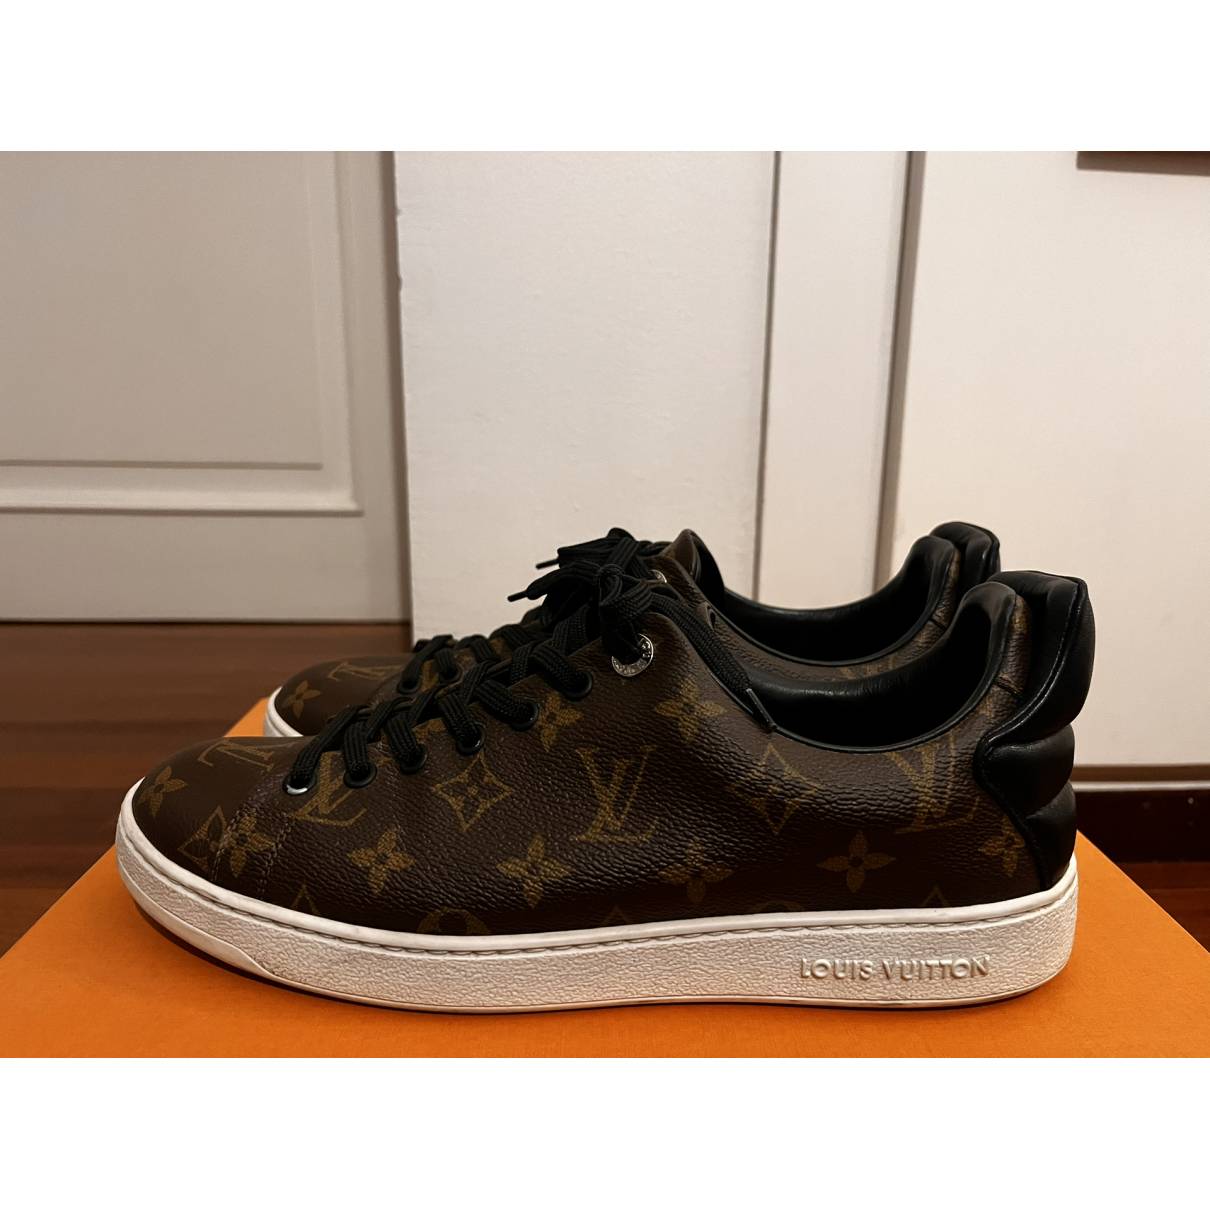 Leather low trainers Louis Vuitton Brown size 40.5 EU in Leather